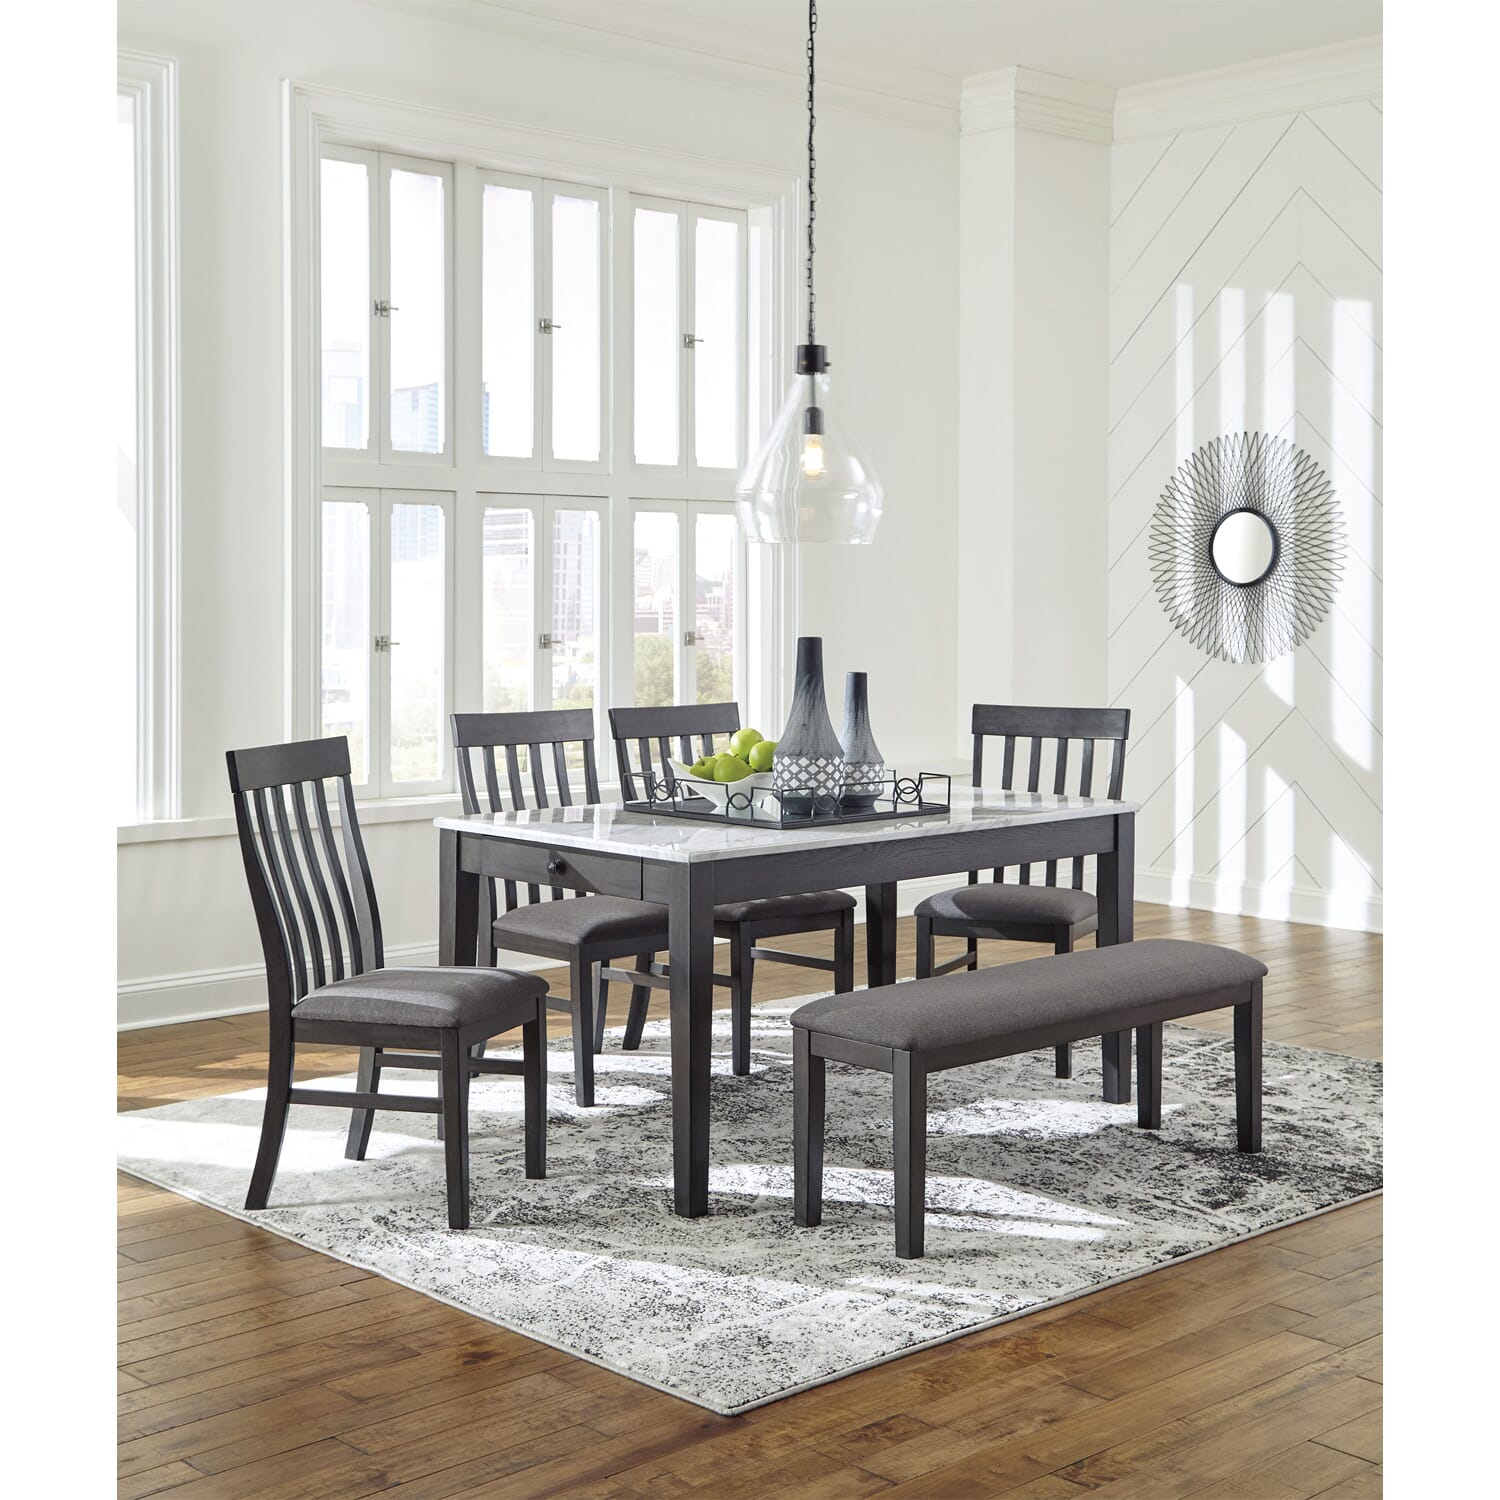 Ellis 6-Pc. Dining Package | Dining Room Sets, New ...